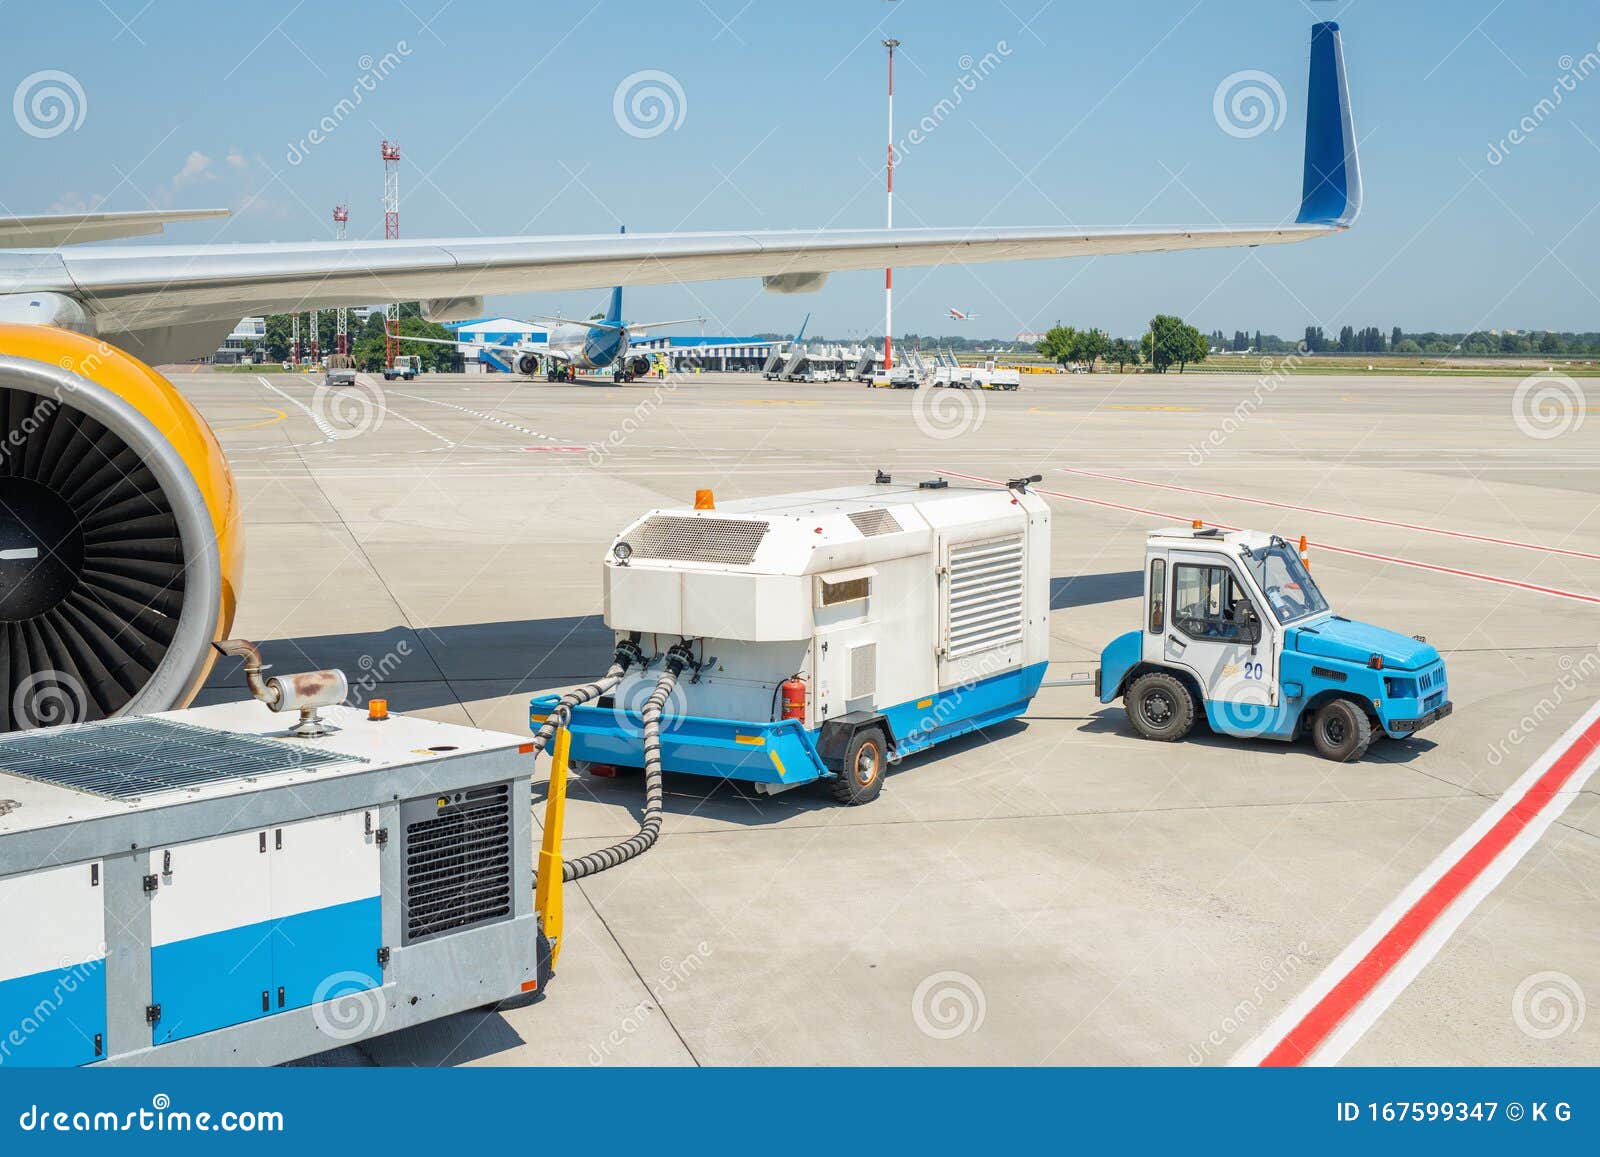 Big Modern Commercial Plane Parked On Airport Runway And Connected To  Ground Supply Power Unit. Aircraft Maintenance Stock Image - Image Of  Flight, Ground: 167599347